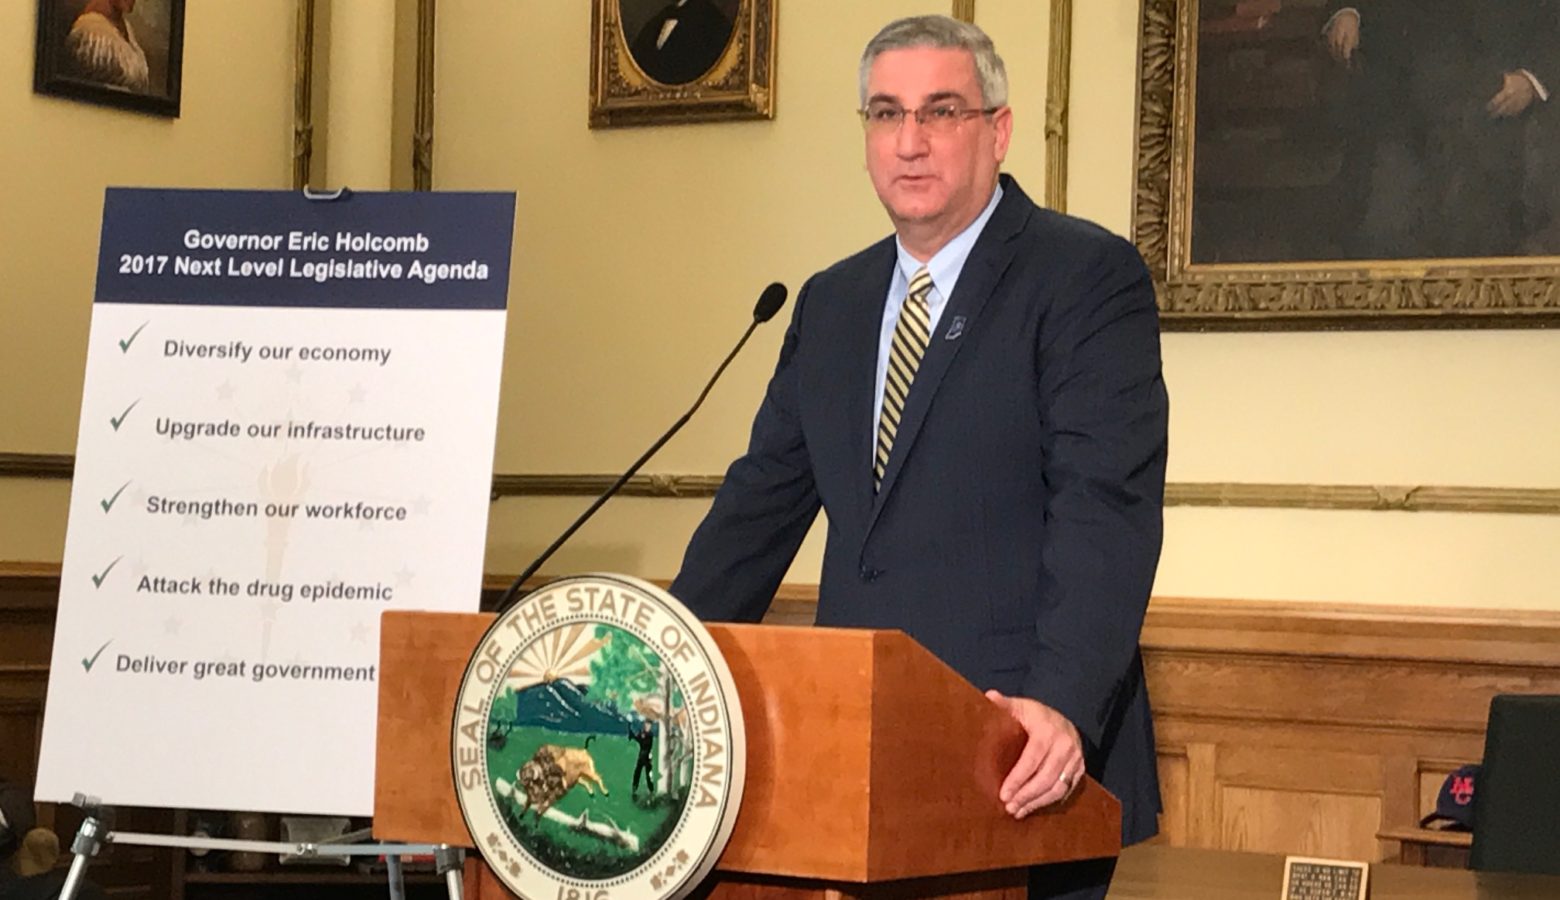 Governor Eric Holcomb discusses the results of the 2017 legislative session. (Brandon Smith/IPB News)